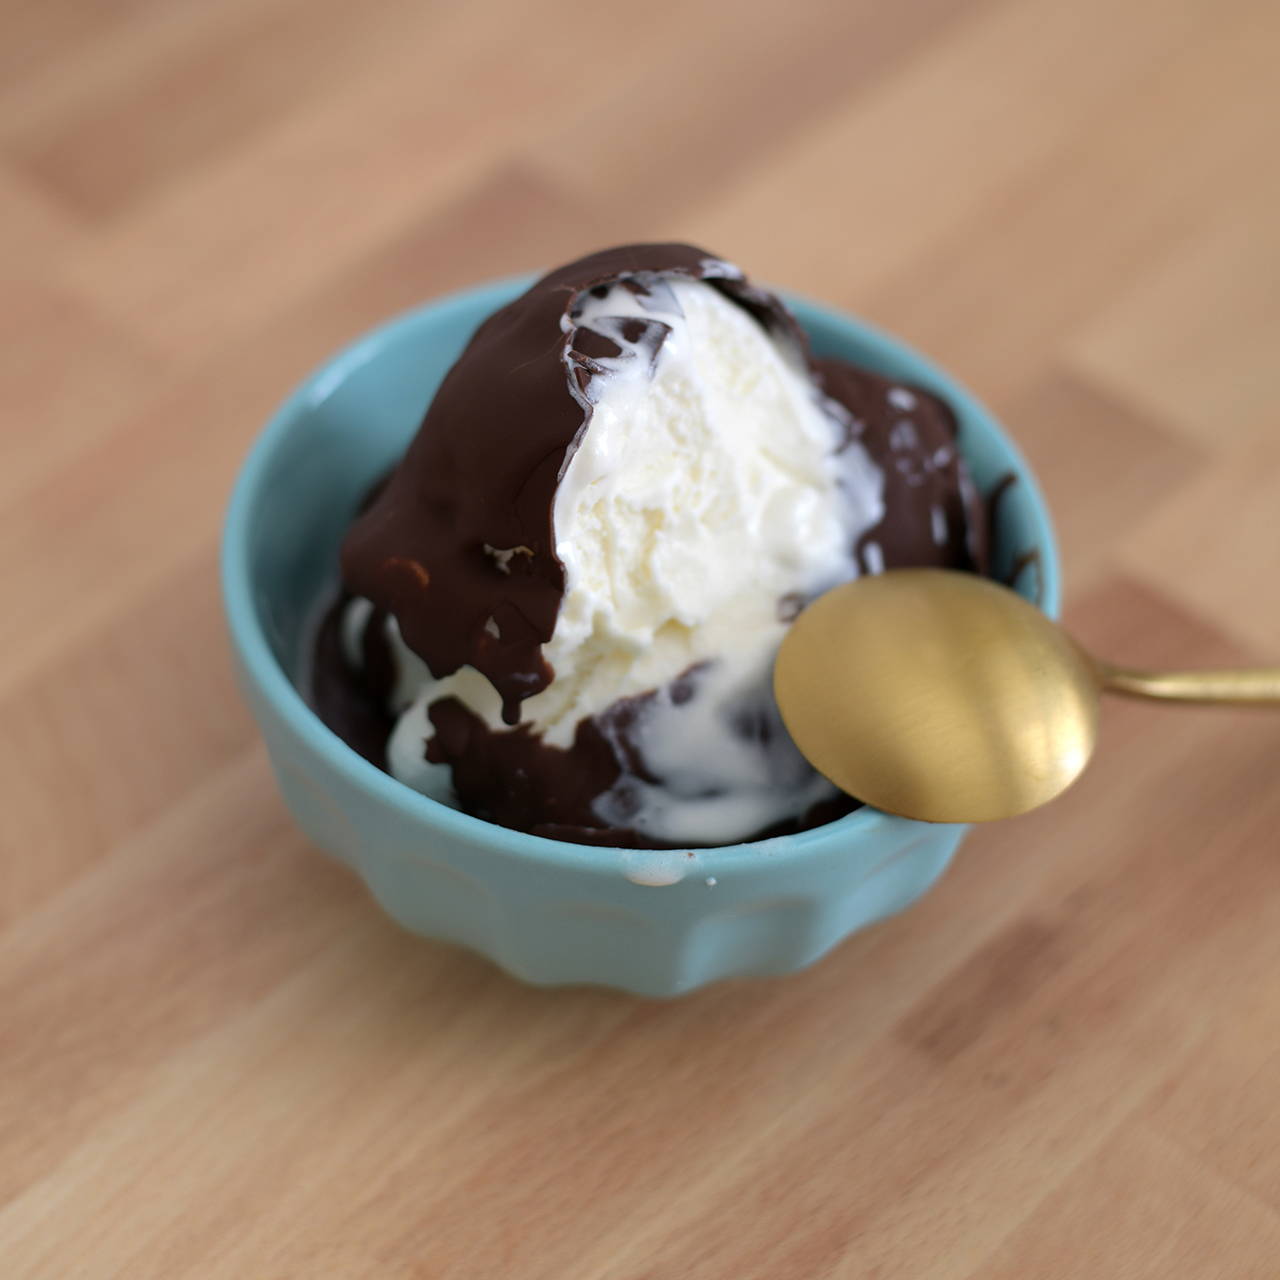 Scoop of ice cream with a chocolate shell in a blue bowl.